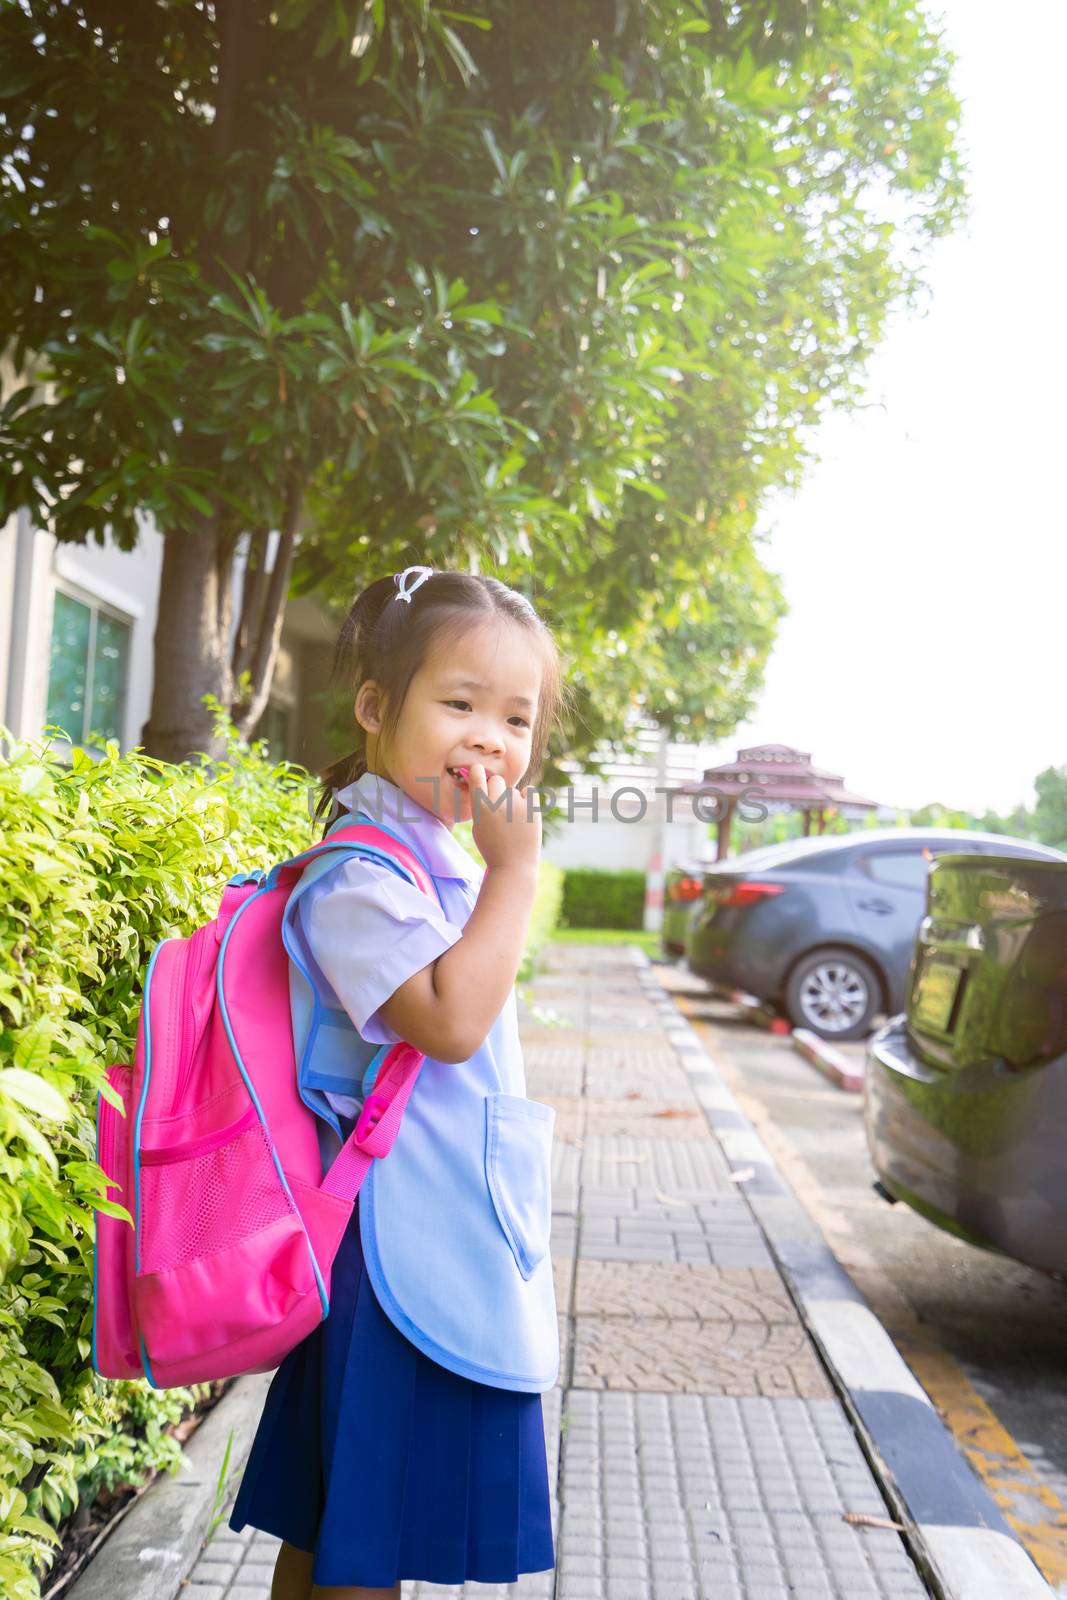 little girl with backpack walking in car park ready back to school